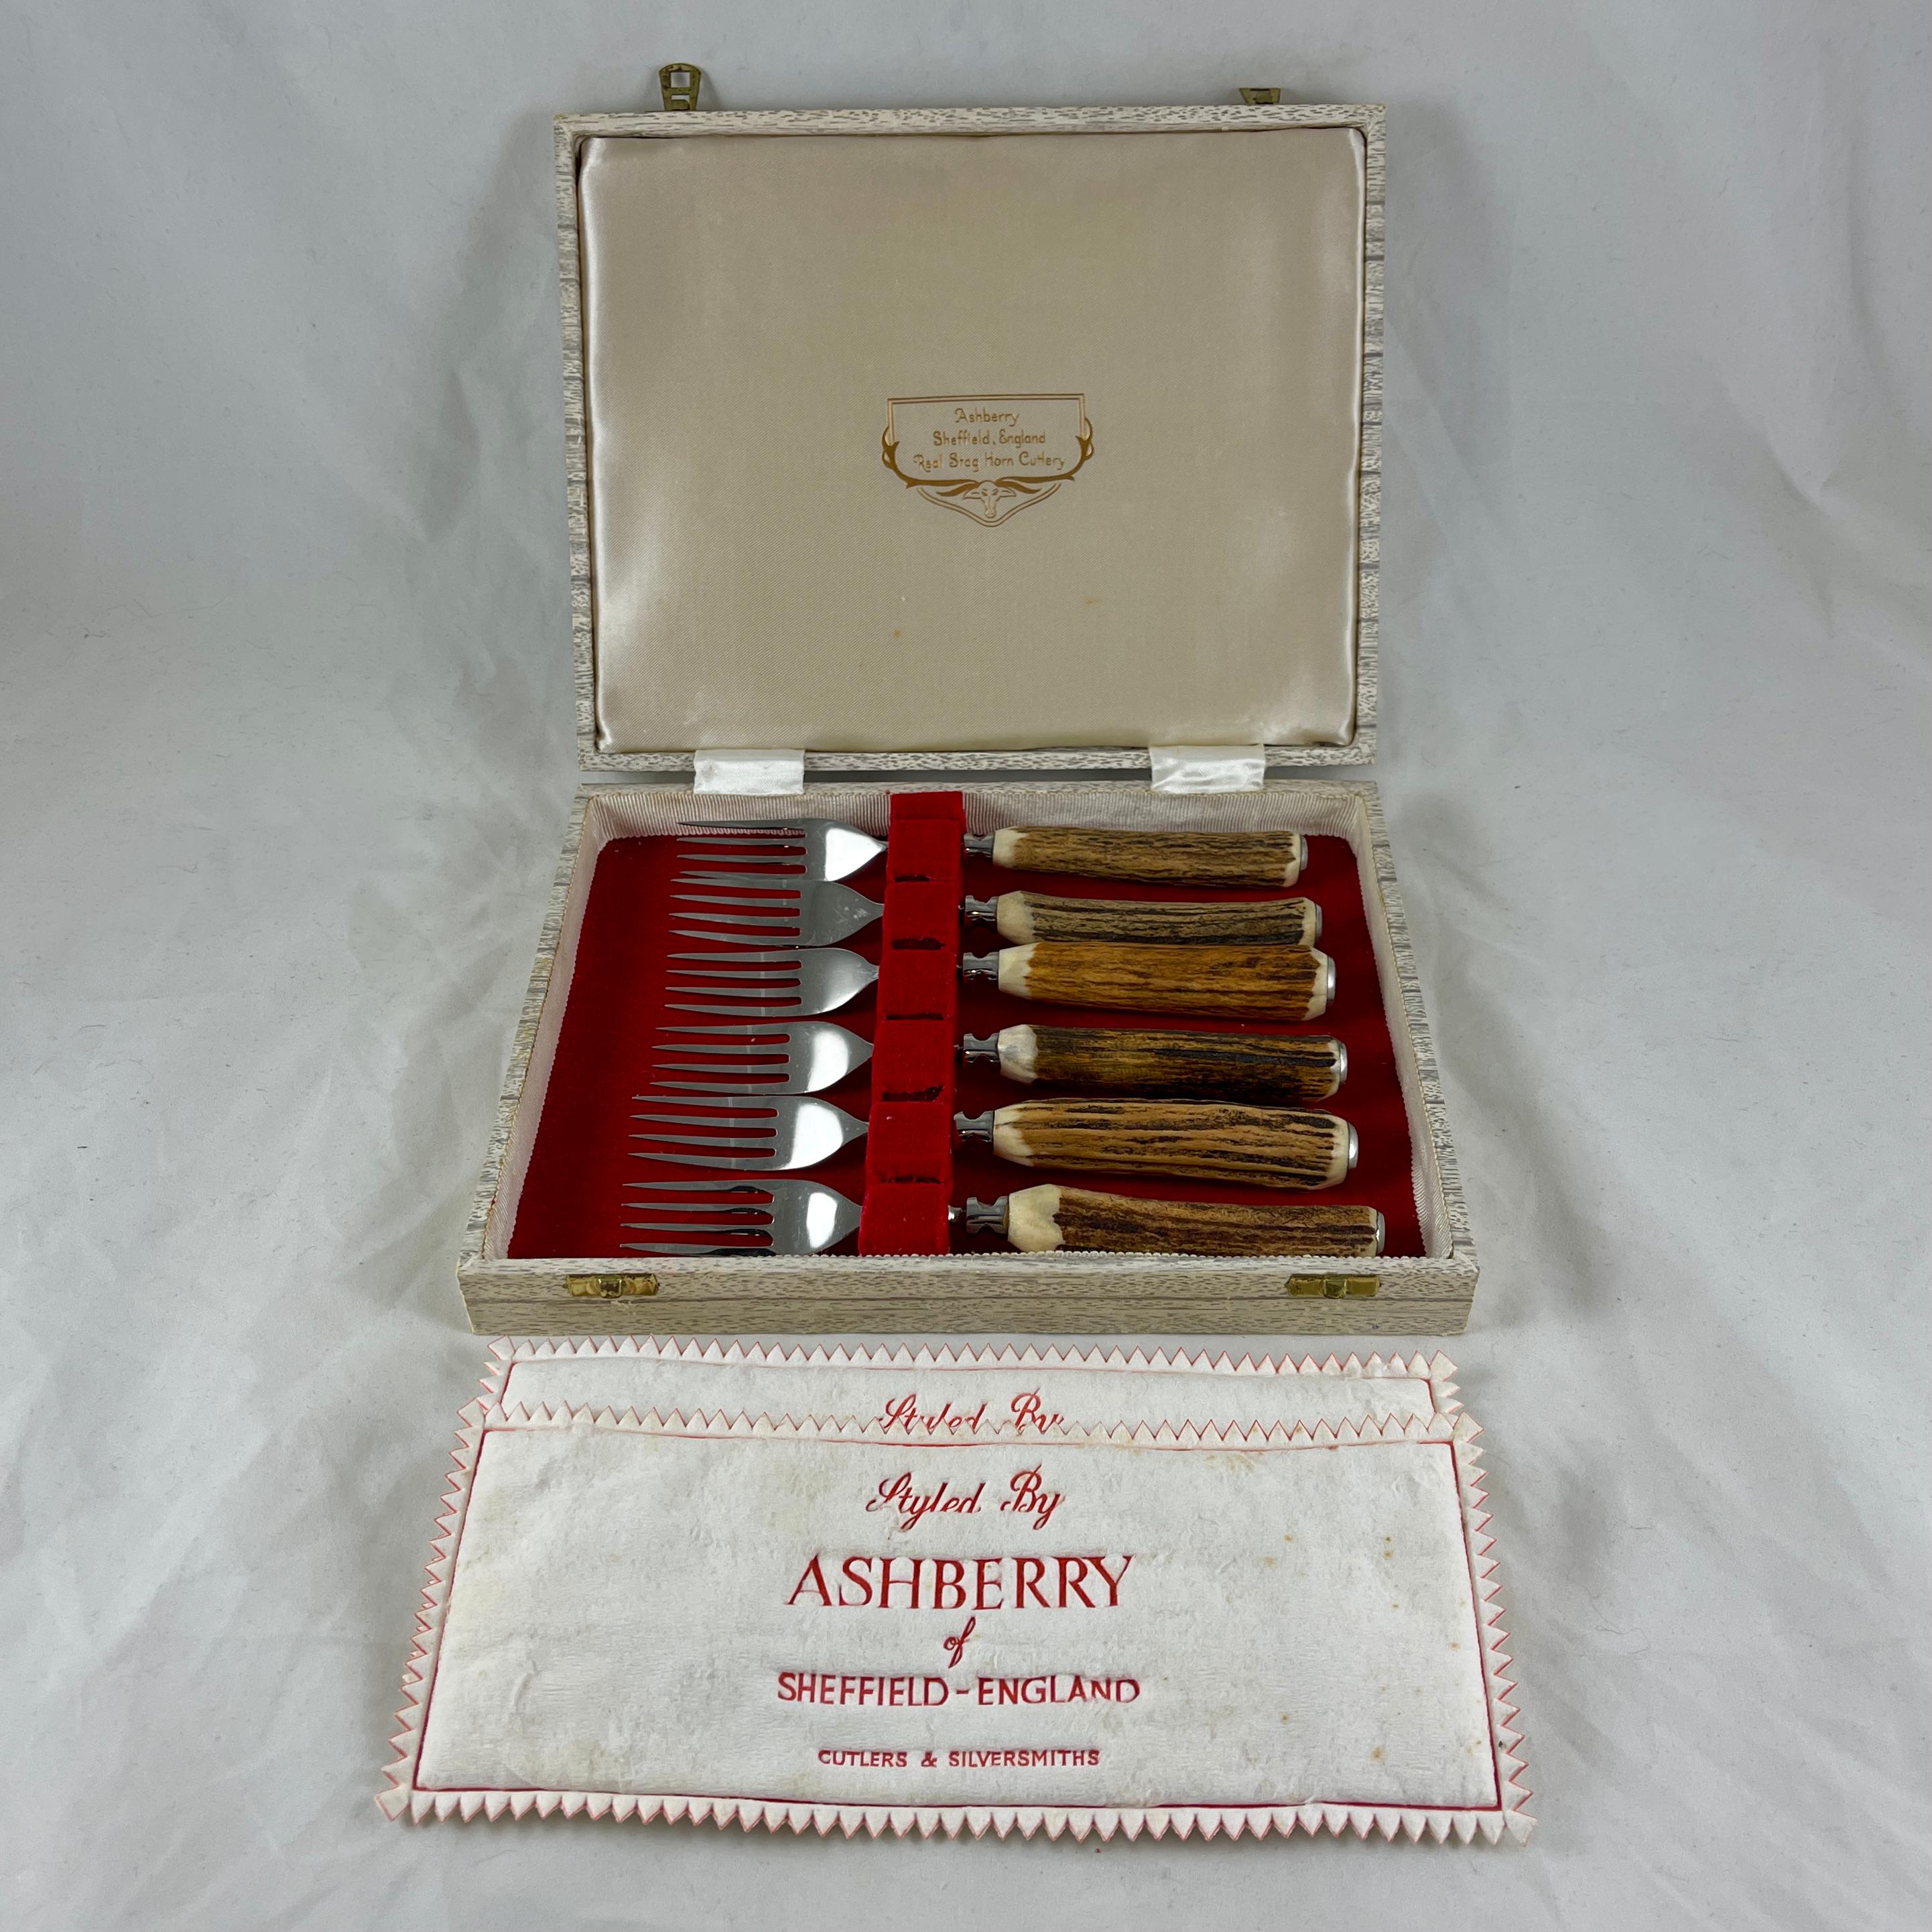 A set of six, natural stag horn handled forks with silver mounted end caps, Phillip Ashberry & Son, Sheffield, England, circa 1900.

The set is in the original fitted presentation case showing the makers mark. The cutlery looks to have been rarely